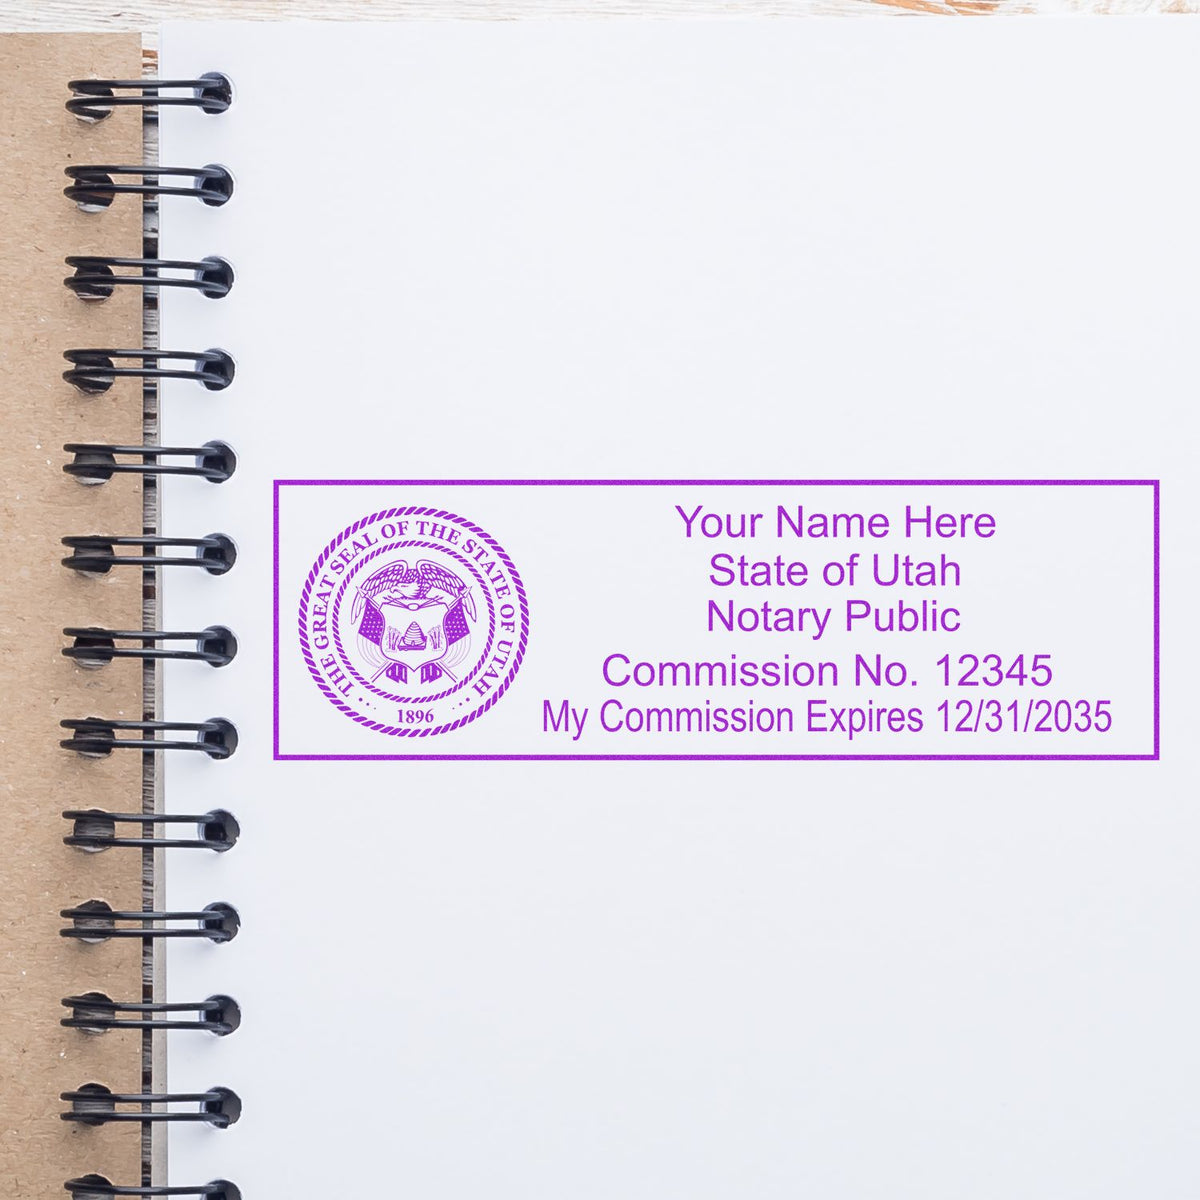 A stamped impression of the MaxLight Premium Pre-Inked Utah State Seal Notarial Stamp in this stylish lifestyle photo, setting the tone for a unique and personalized product.